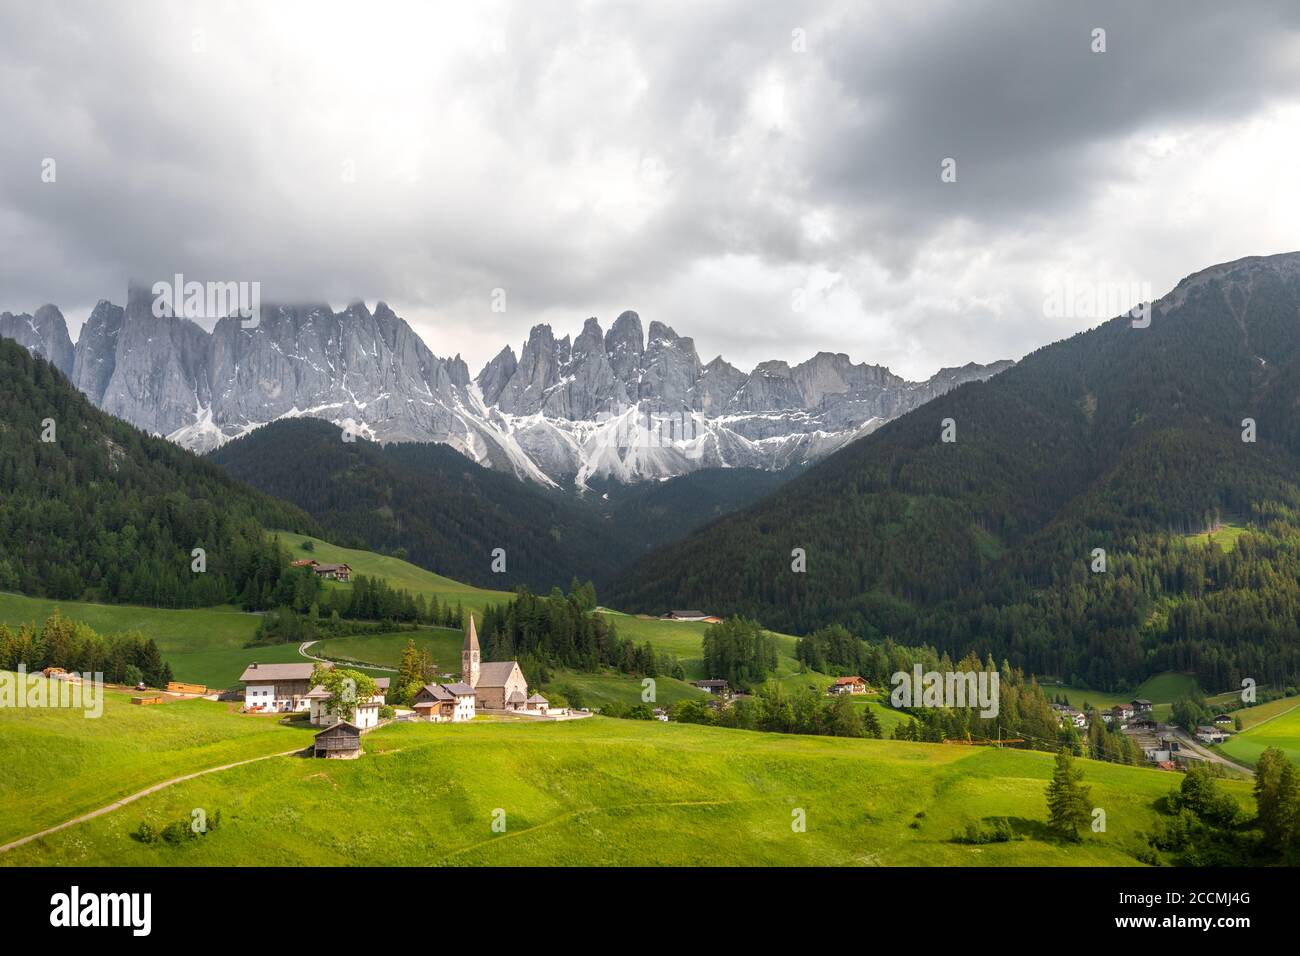 Wide angle view of an Italian valley, with a small church surrounded by meadows and trees in the foreground and a mountain range in the background Stock Photo